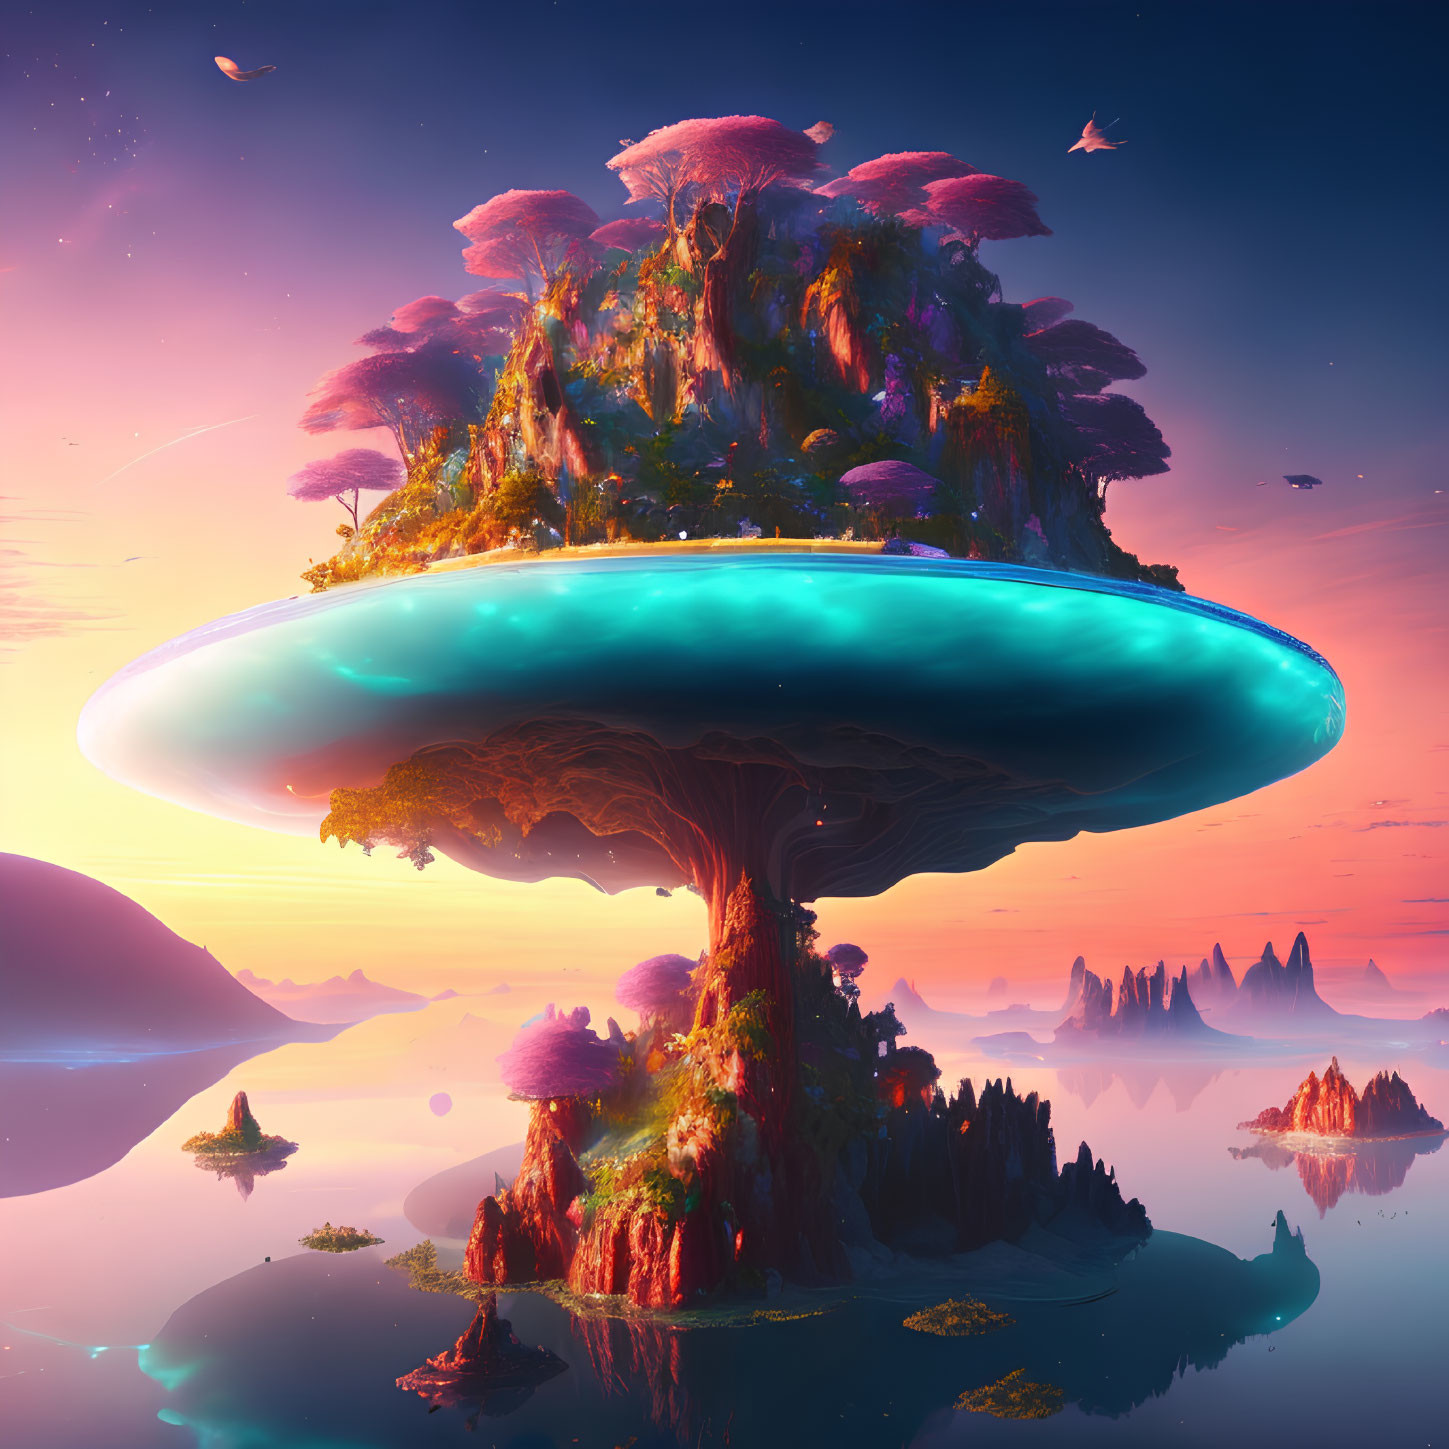 Fantastical landscape with colossal tree, floating islands, reflective water.